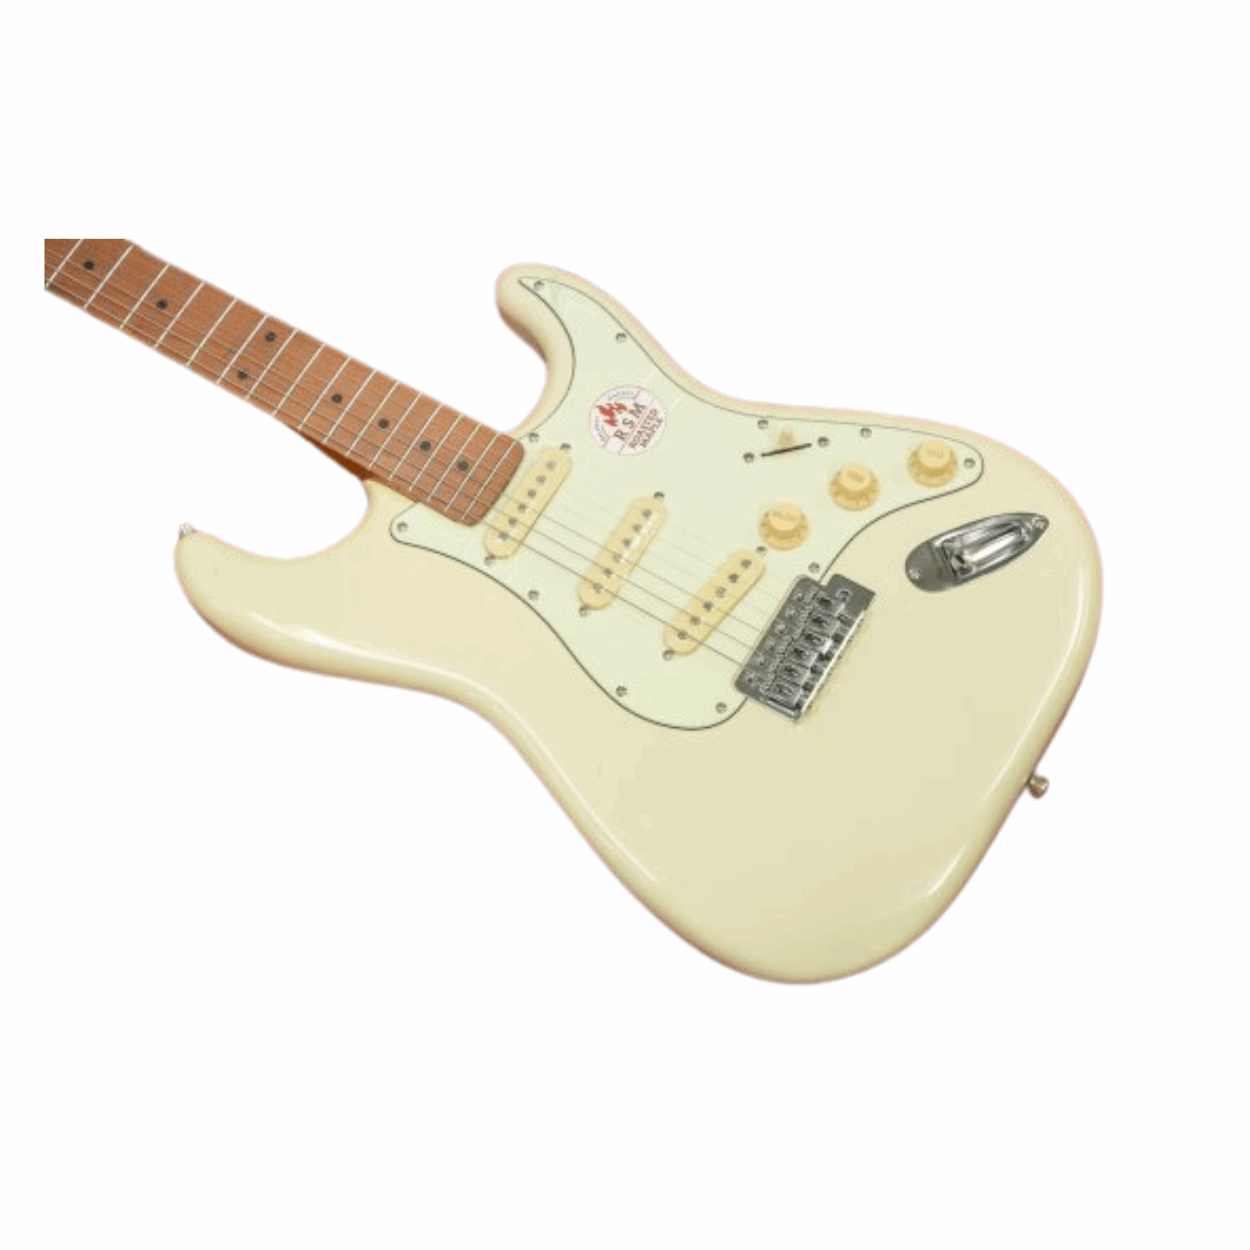 Bacchus Bst-1-rsm/m-owh Universe Series Roasted Maple Electric Guitar, Olympic White With Bag